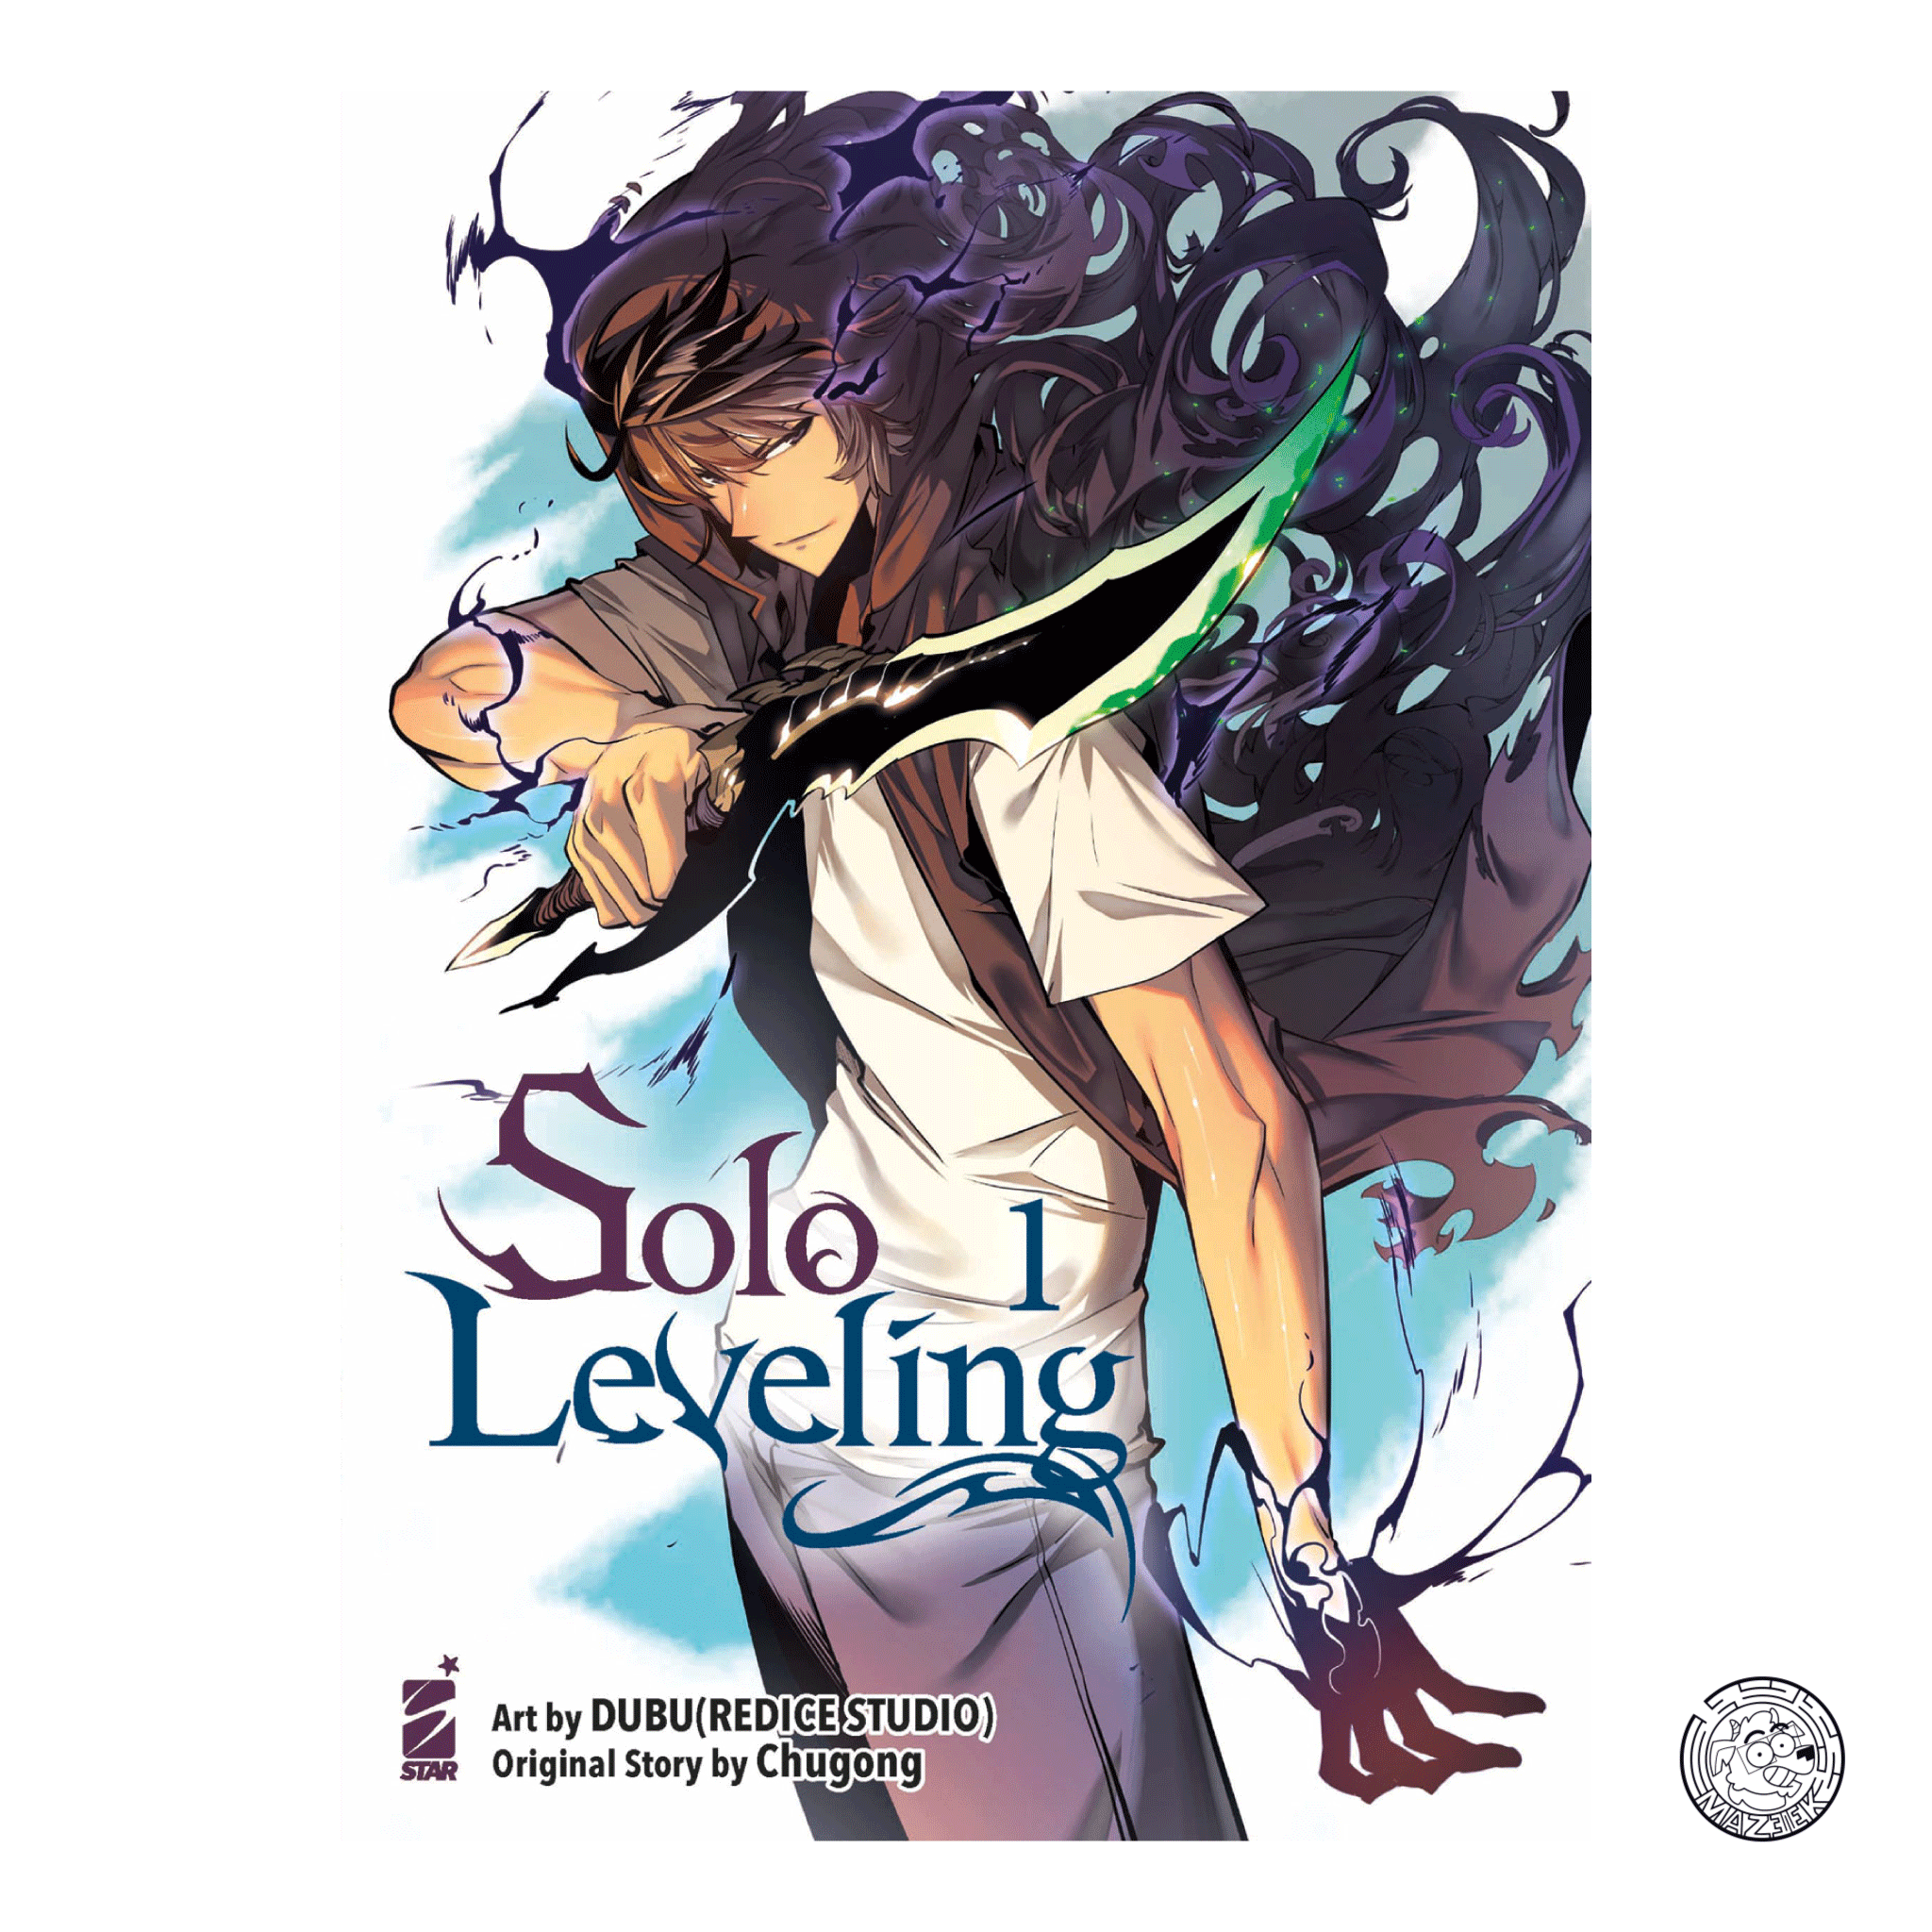 Solo Leveling 01 - Variant Ristampa